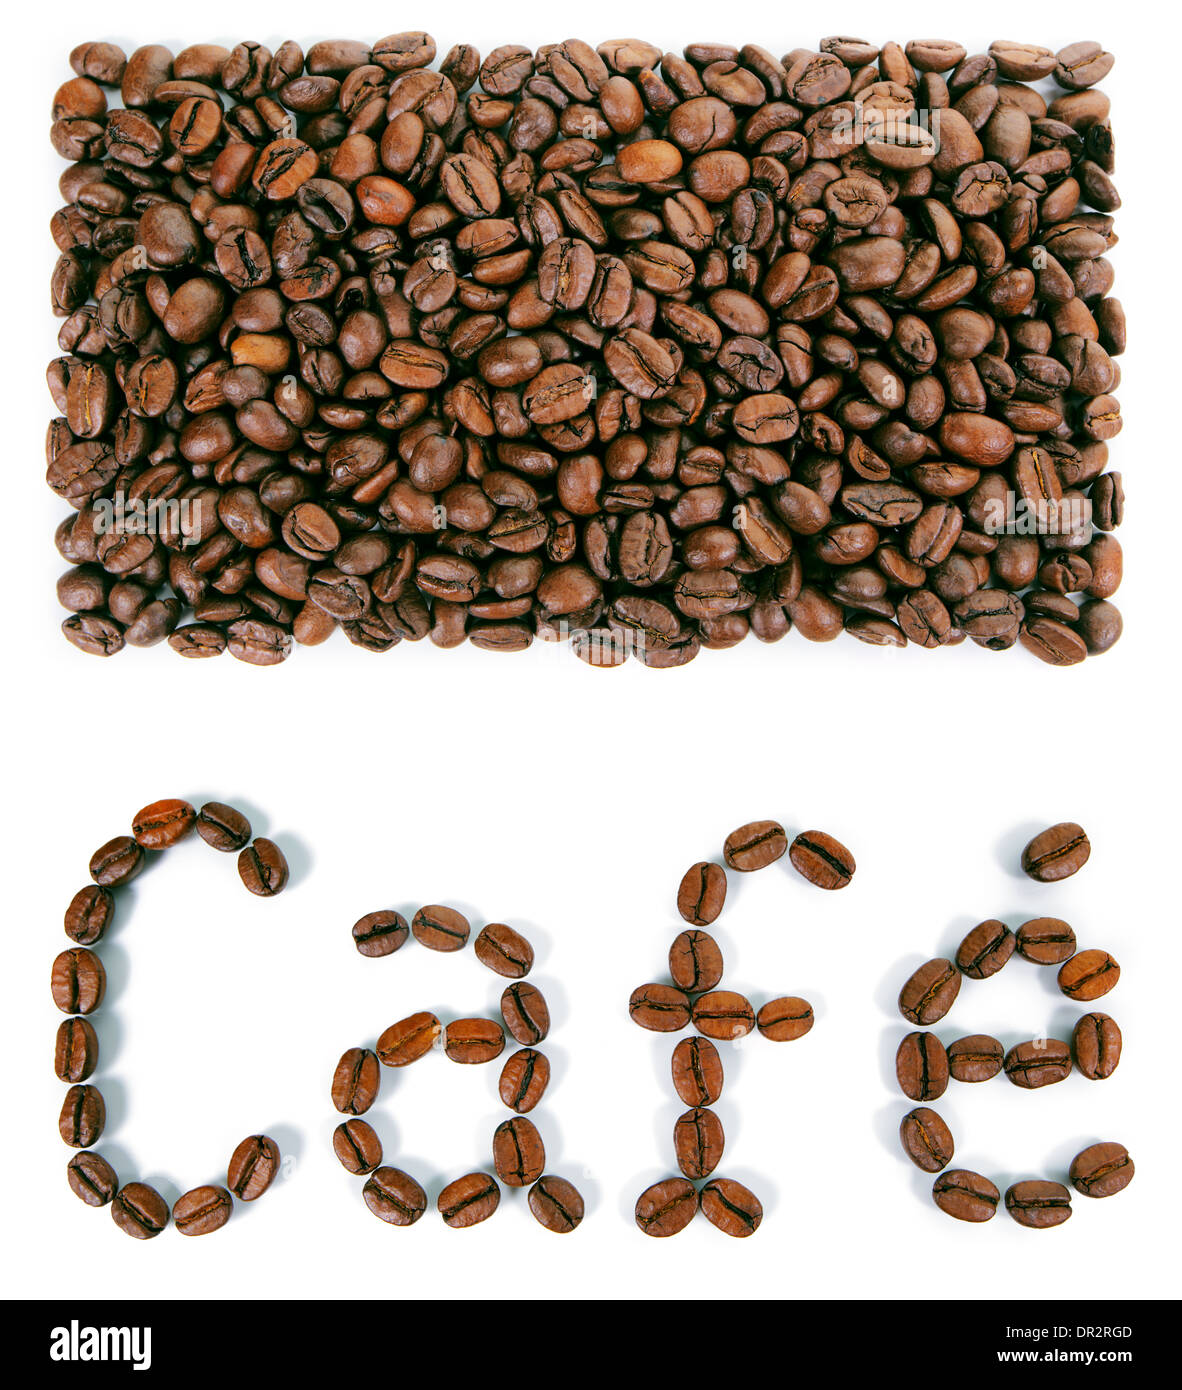 A rectangular shape with the word Cafe created with coffee beans on a white background Stock Photo